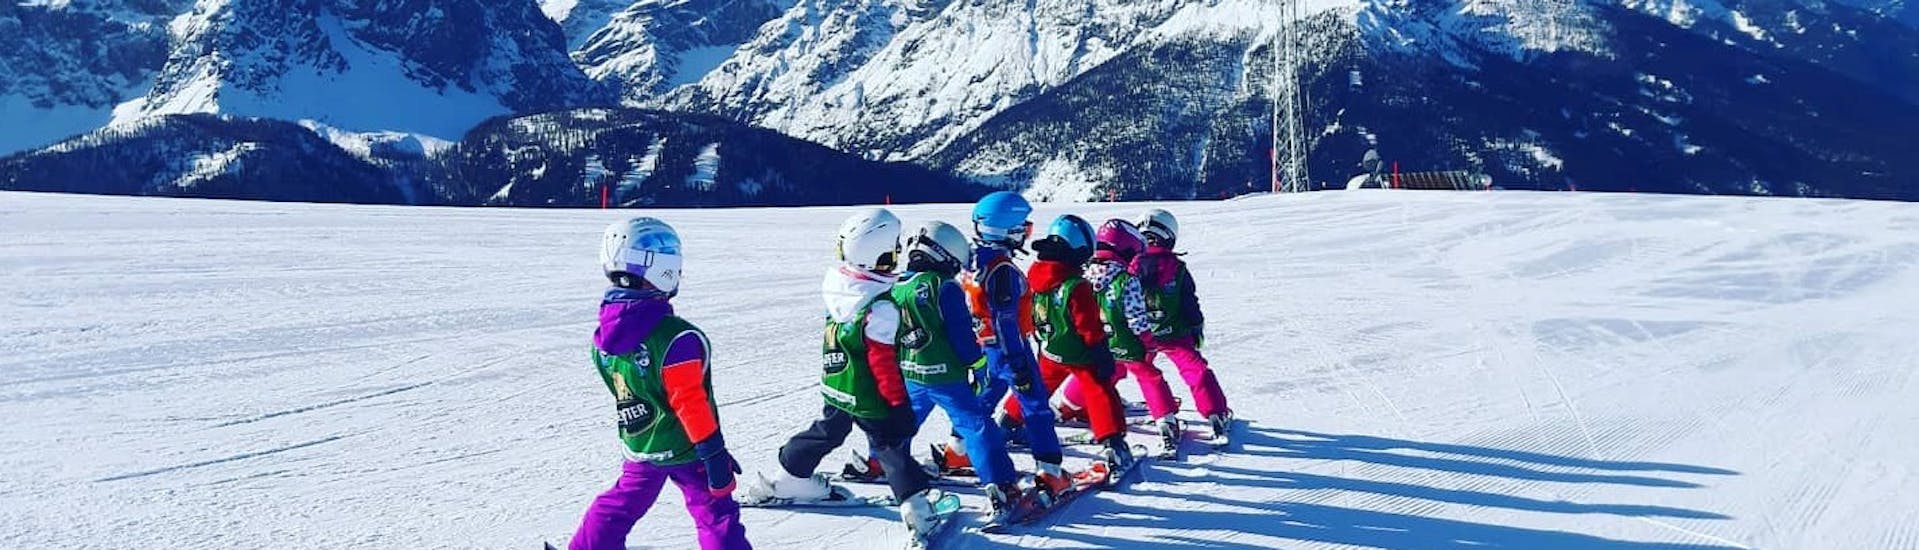 Kids waiting to perform one of the exercises during one of the kids ski lessons for all levels in Monte Elmo.